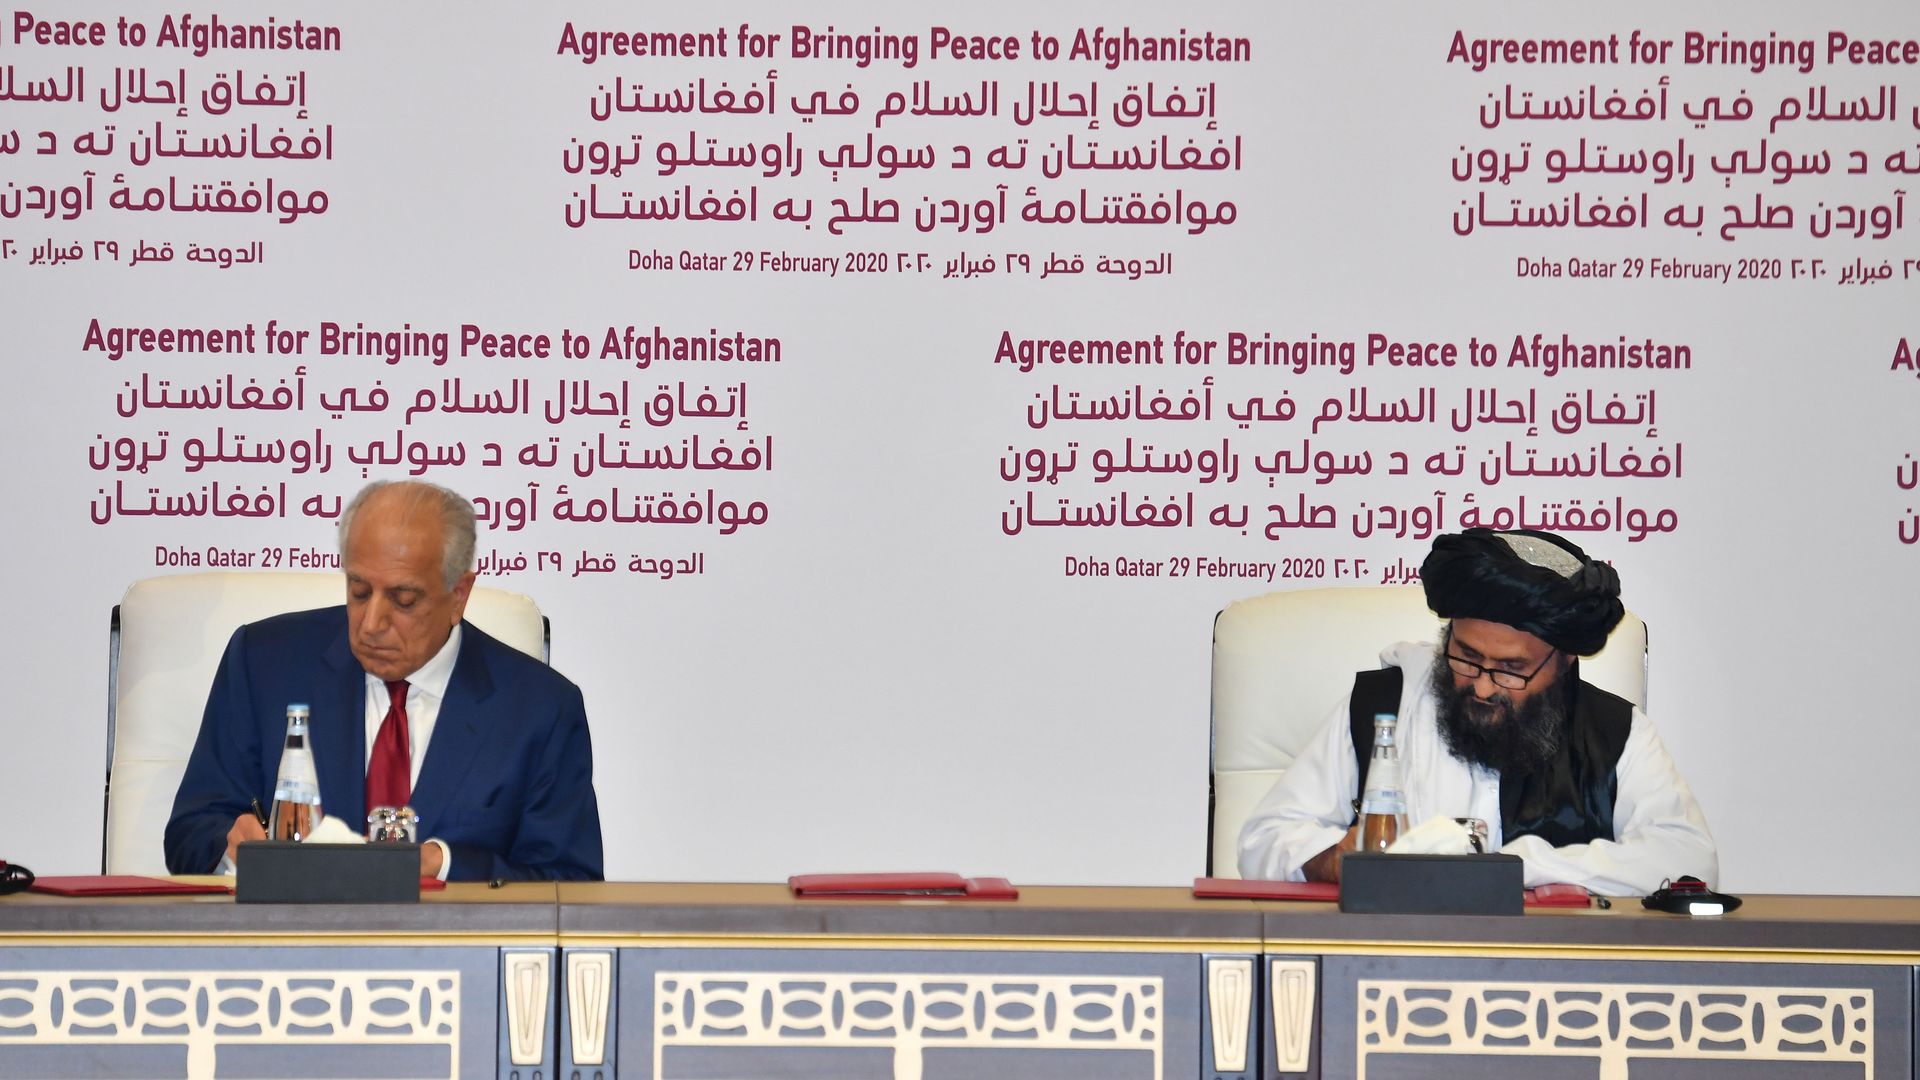  US Special Representative for Afghanistan Reconciliation Zalmay Khalilzad and Taliban co-founder Mullah Abdul Ghani Baradar sign a peace agreement during a ceremony